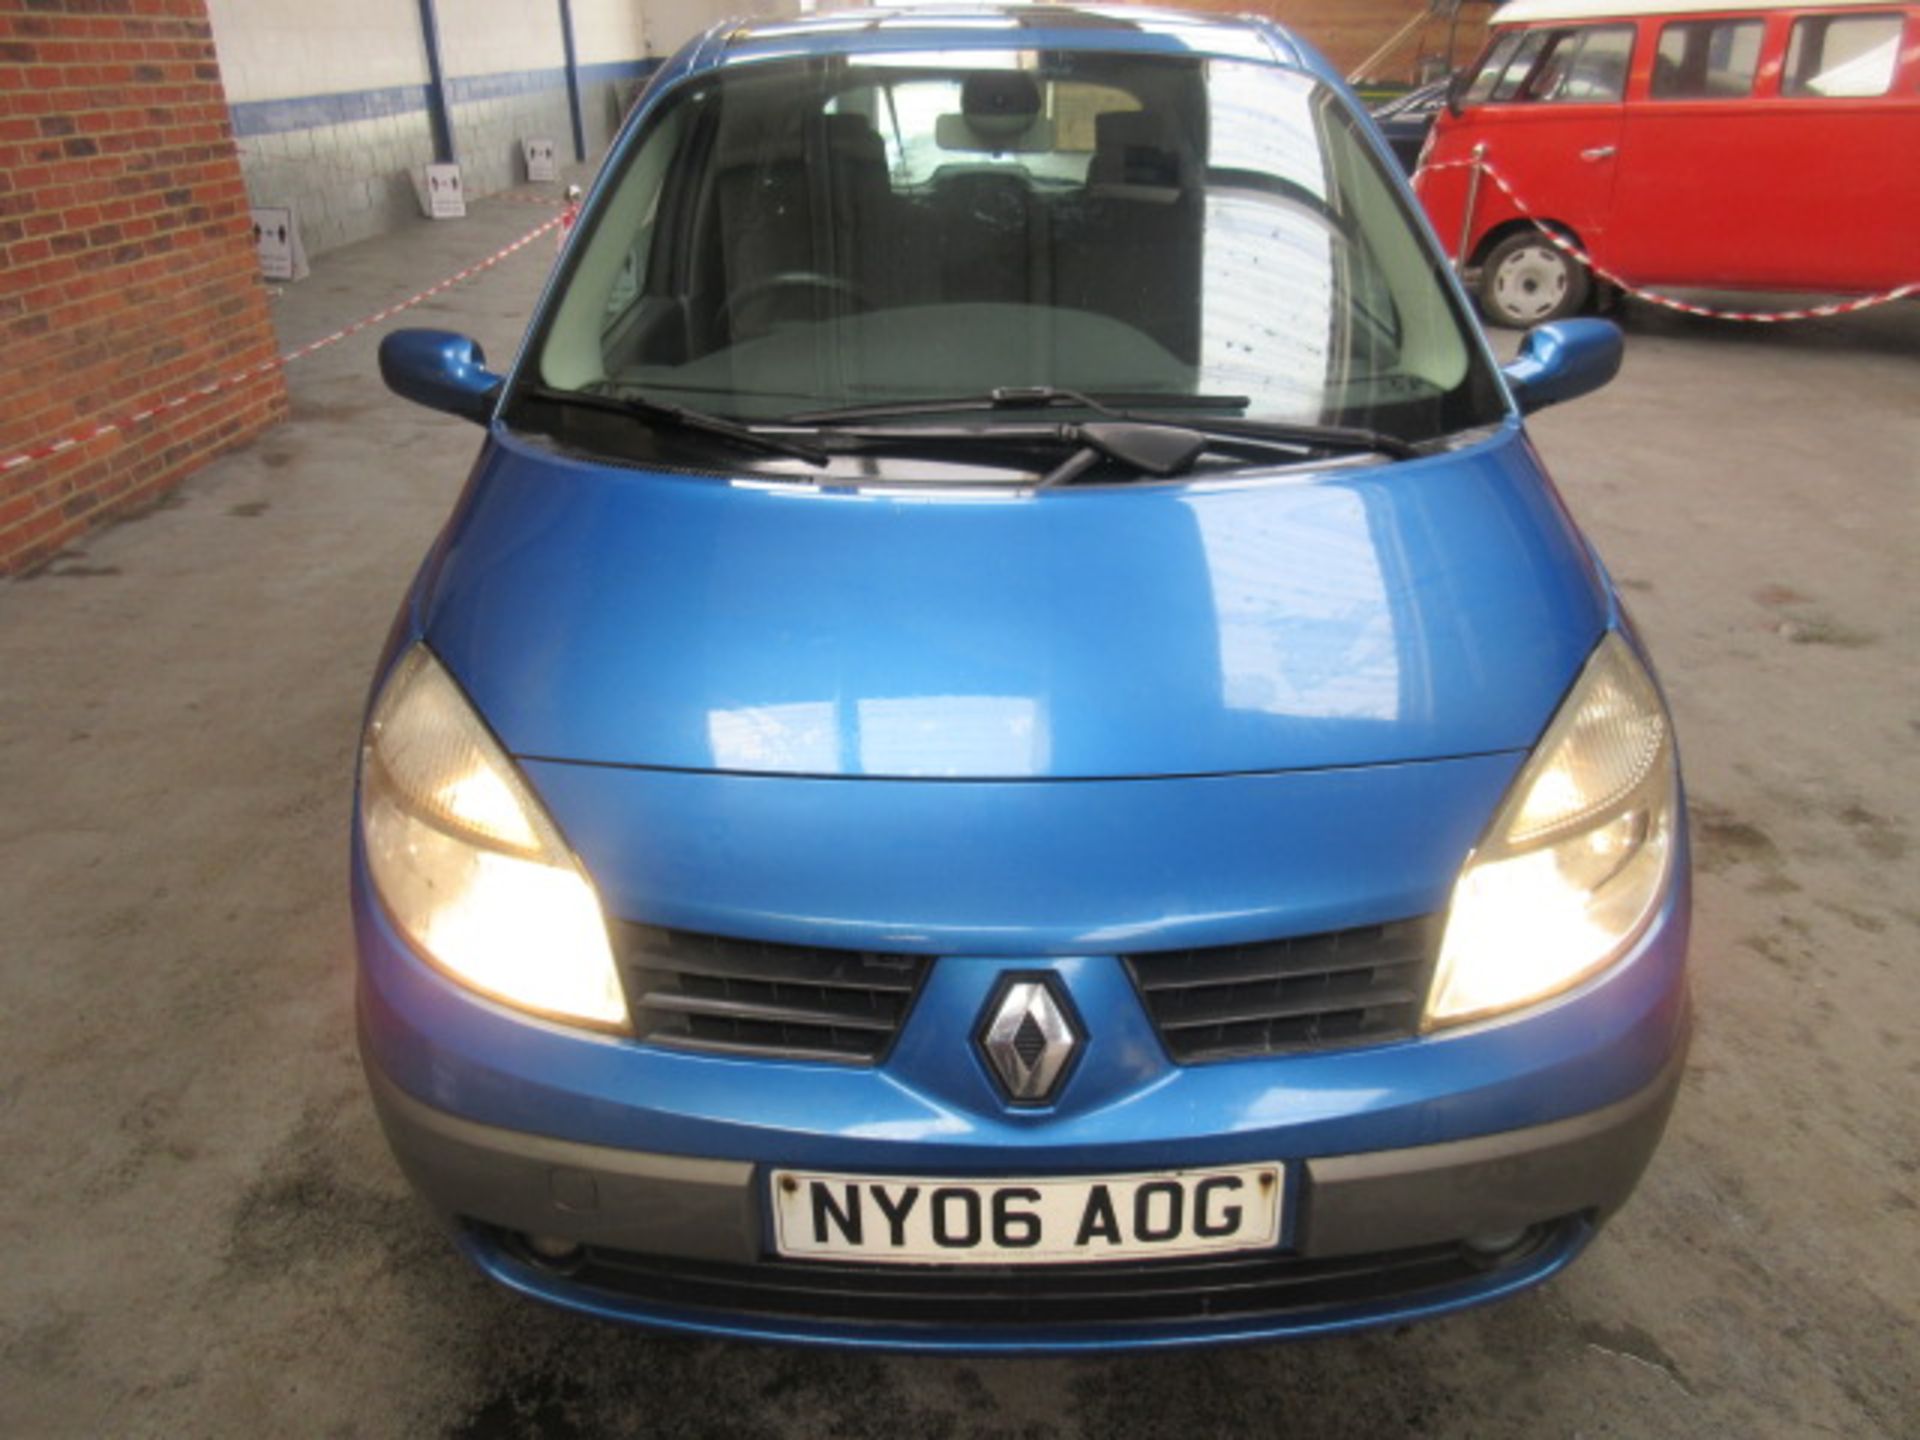 06 06 Renault Scenic Dynamique - Image 3 of 9